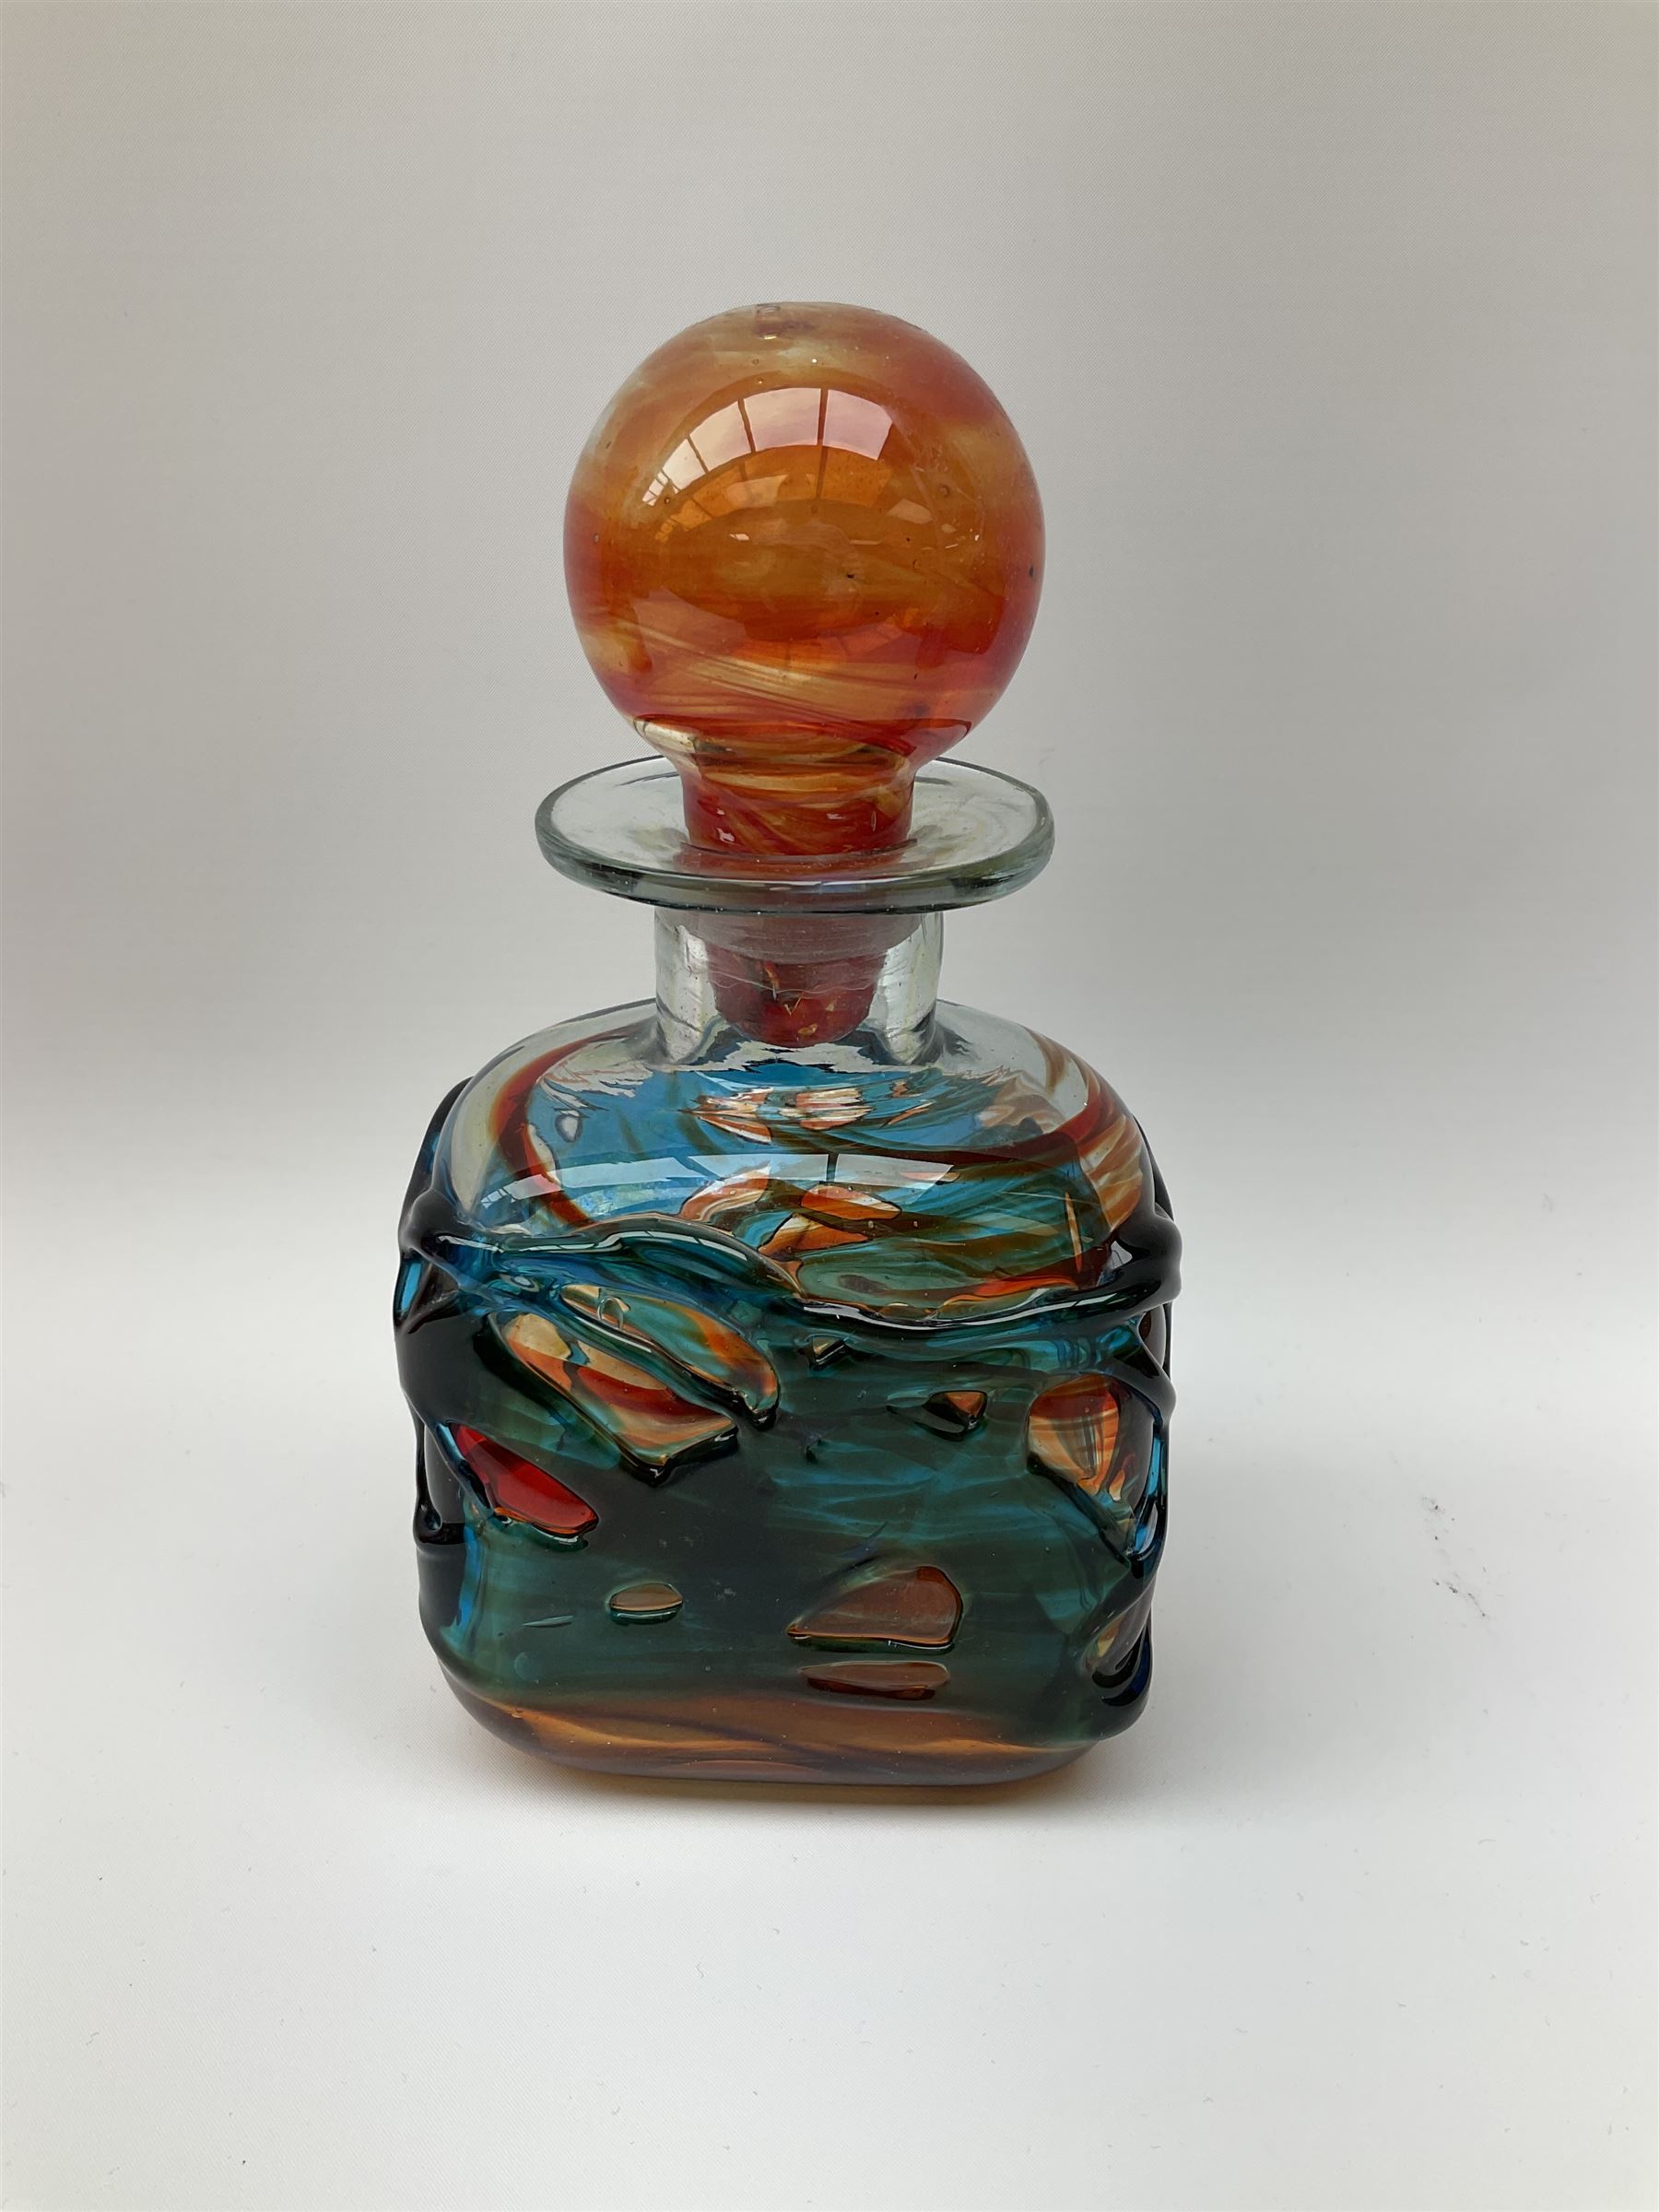 Mdina art glass decanter of red and orange glass with blue trellis work - Image 3 of 18